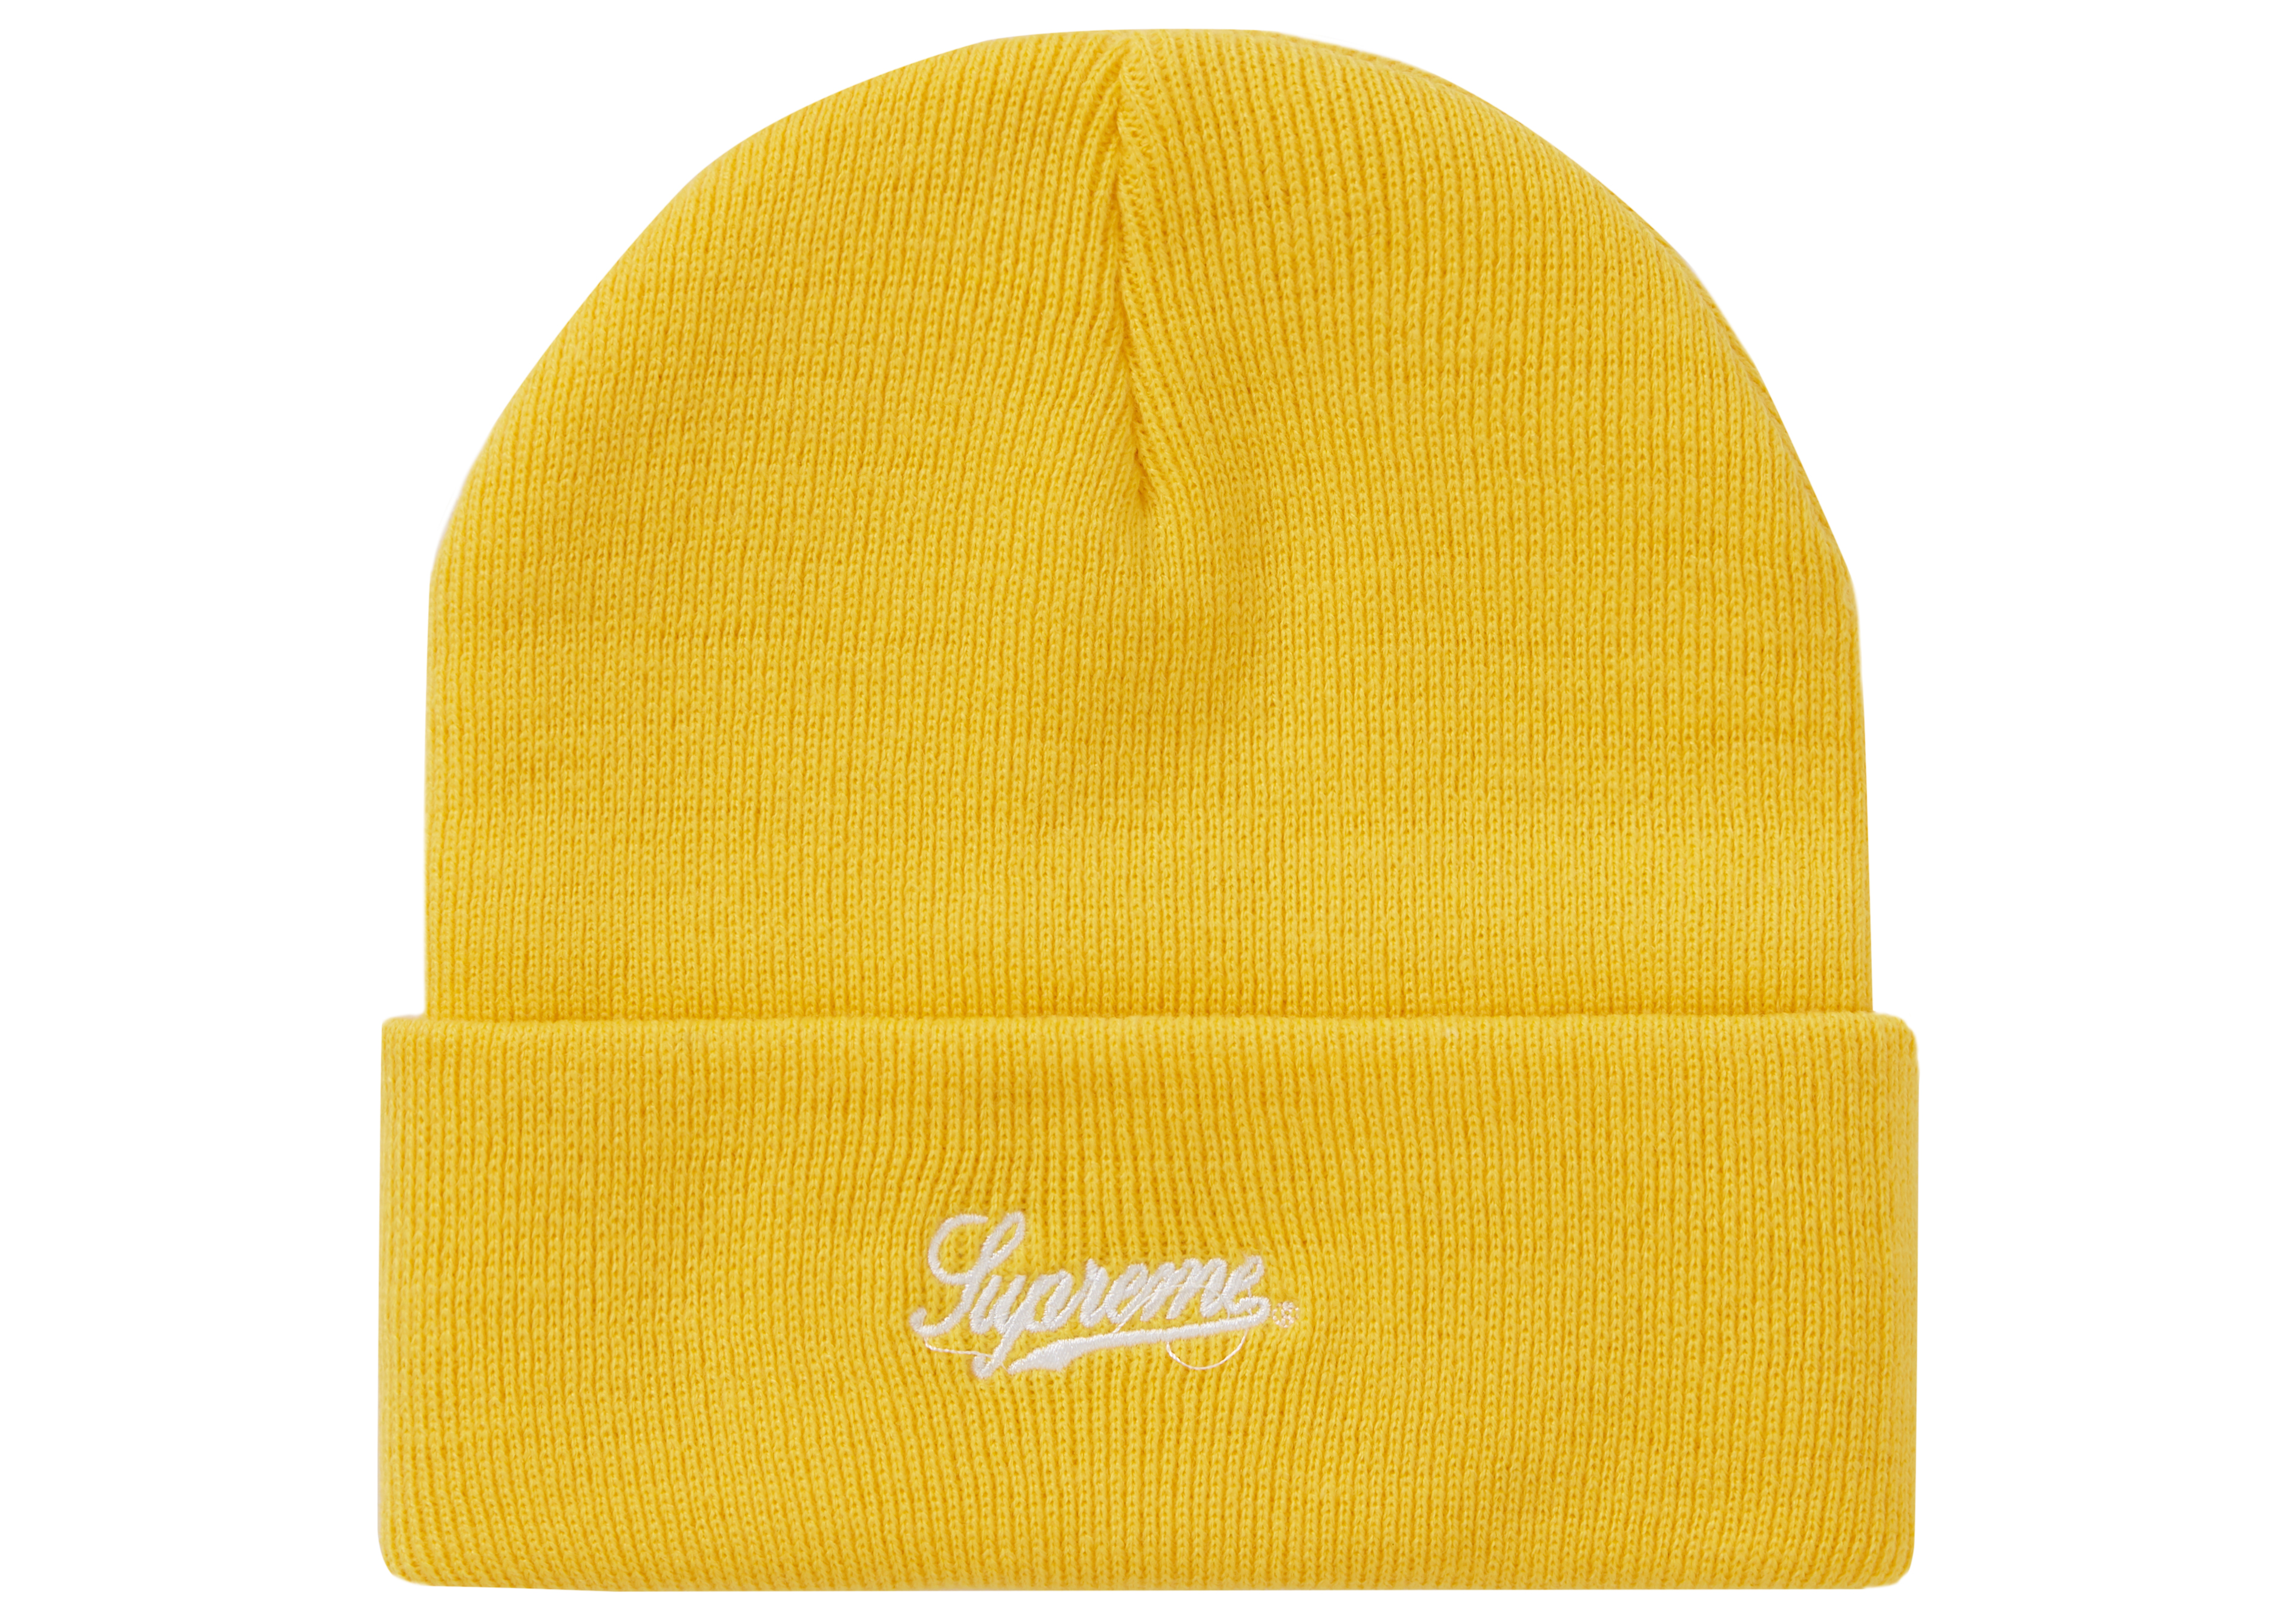 Details about   Supreme Black Ark Beanie Cap Fluorescent Yellow FW20 Supreme New York 2020 New 